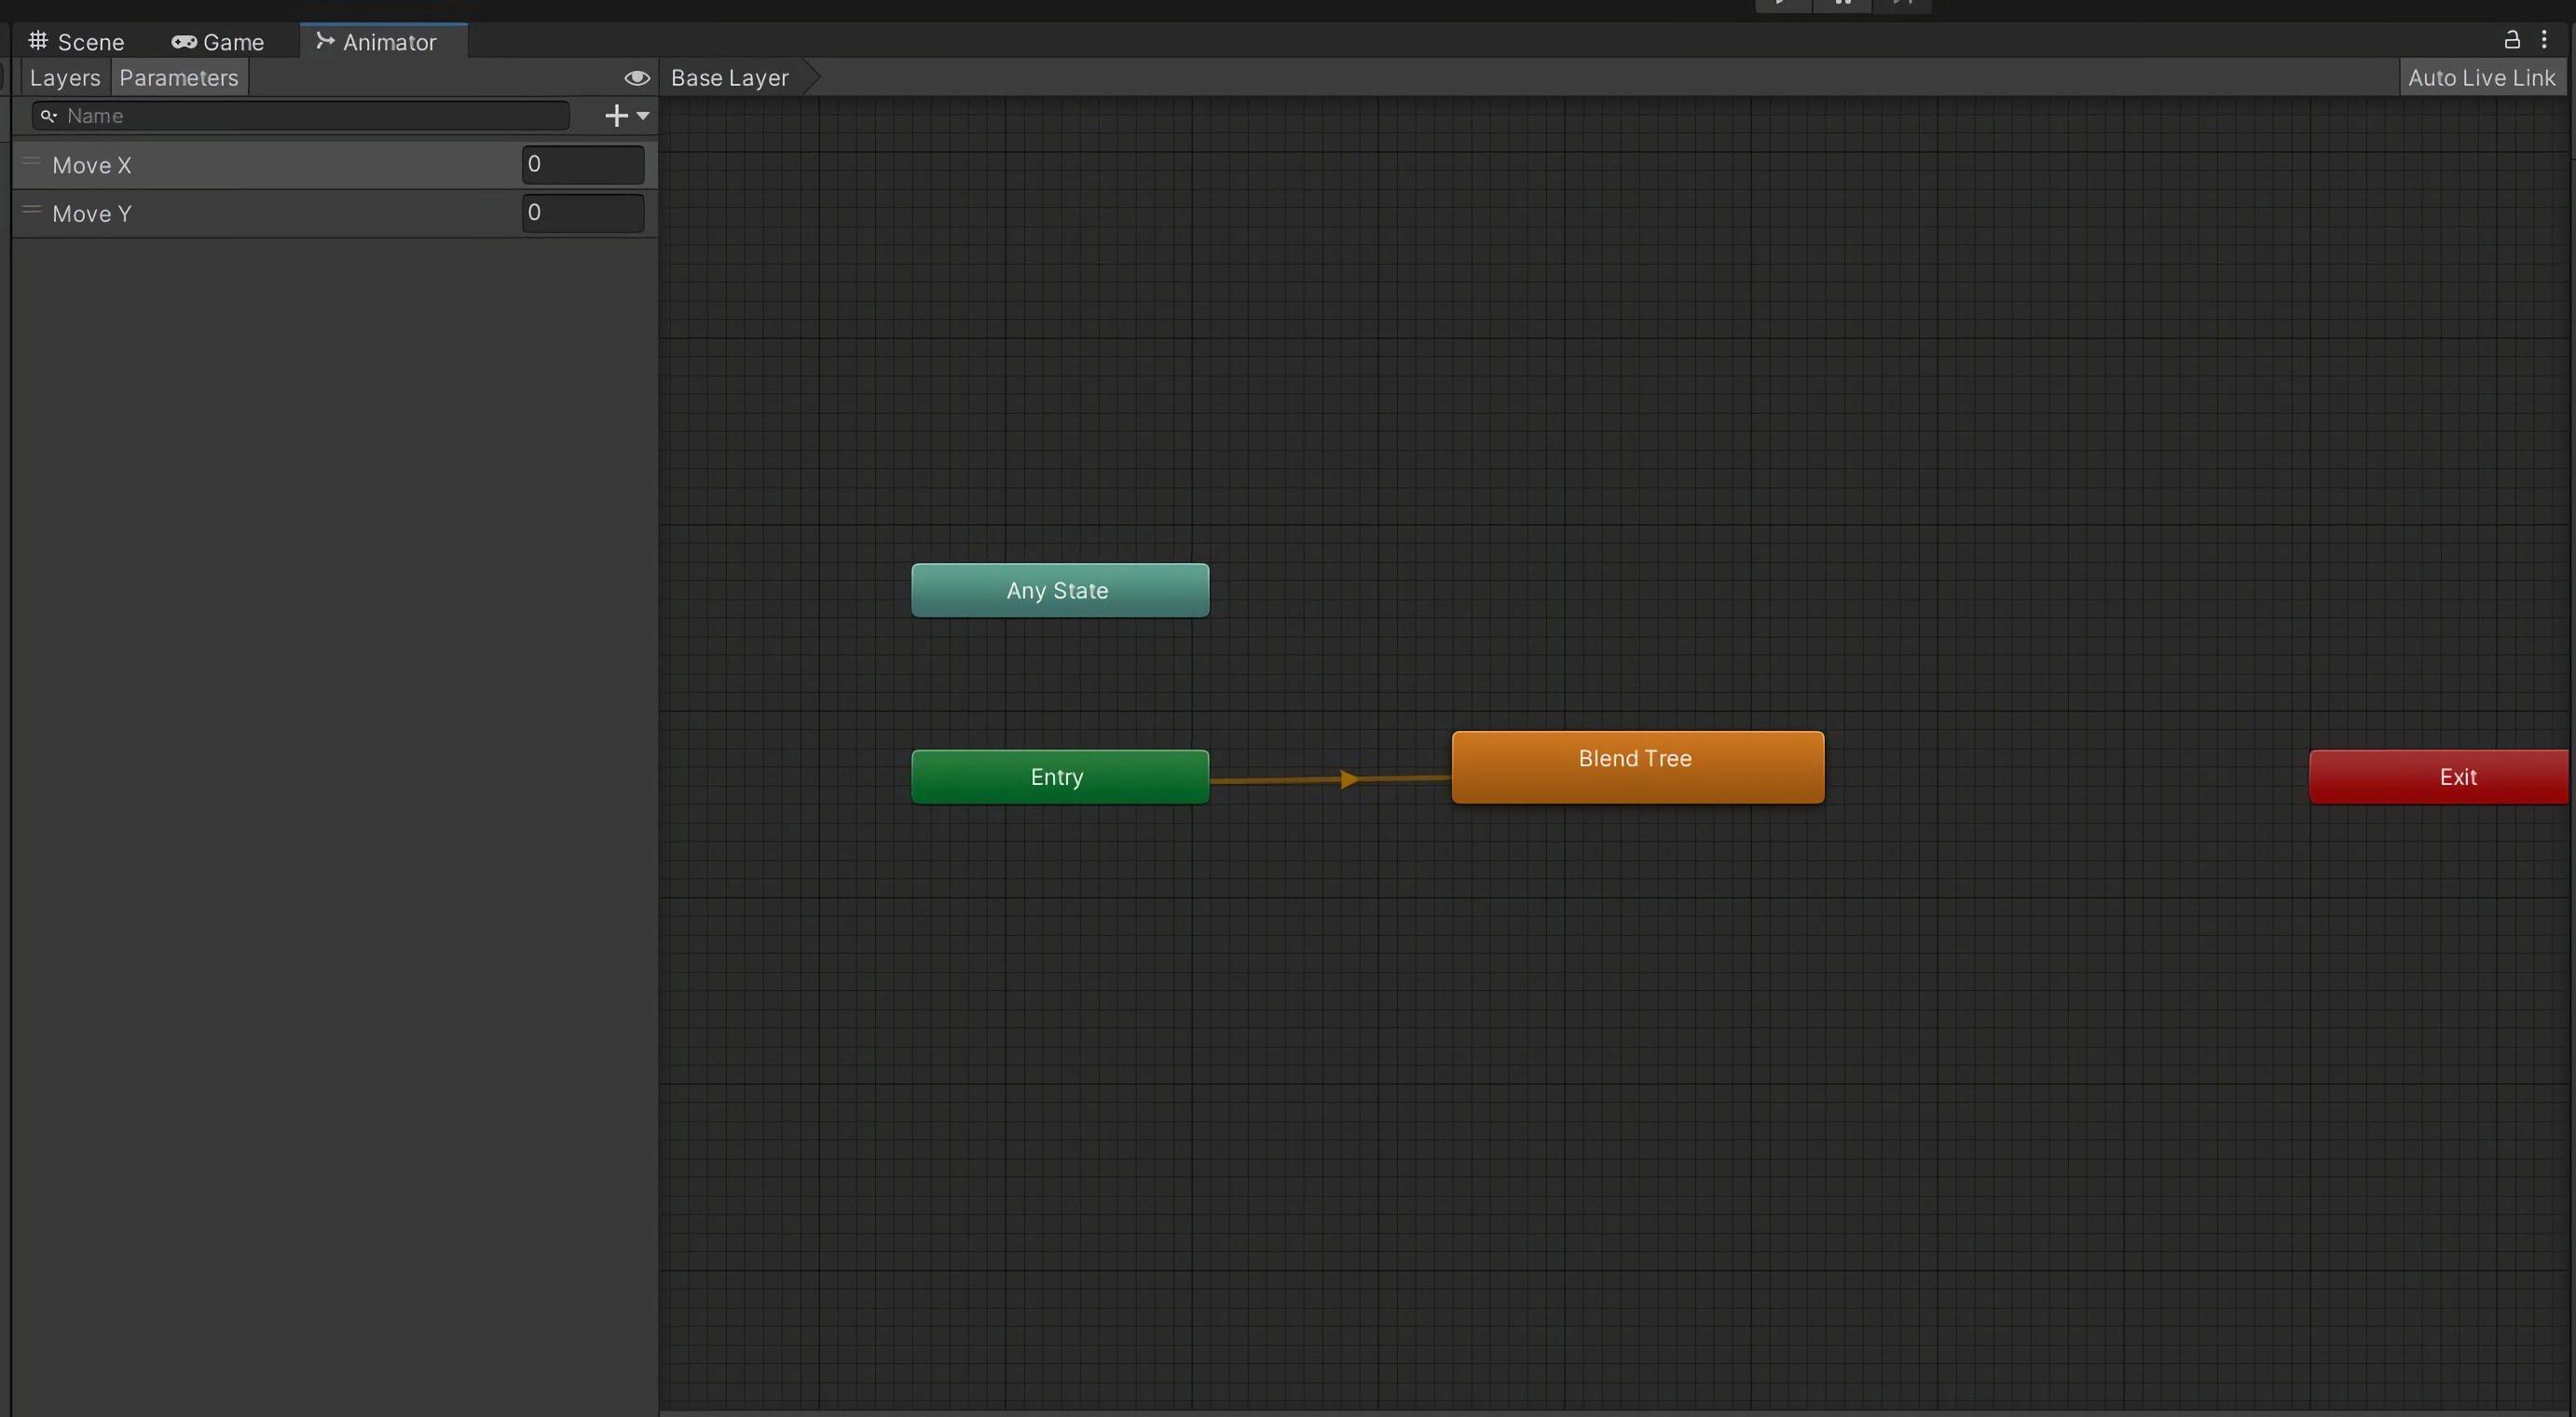 (../img/unity-14-2d-game-10-animation/2d-game-animation-step-3-2.jpg)